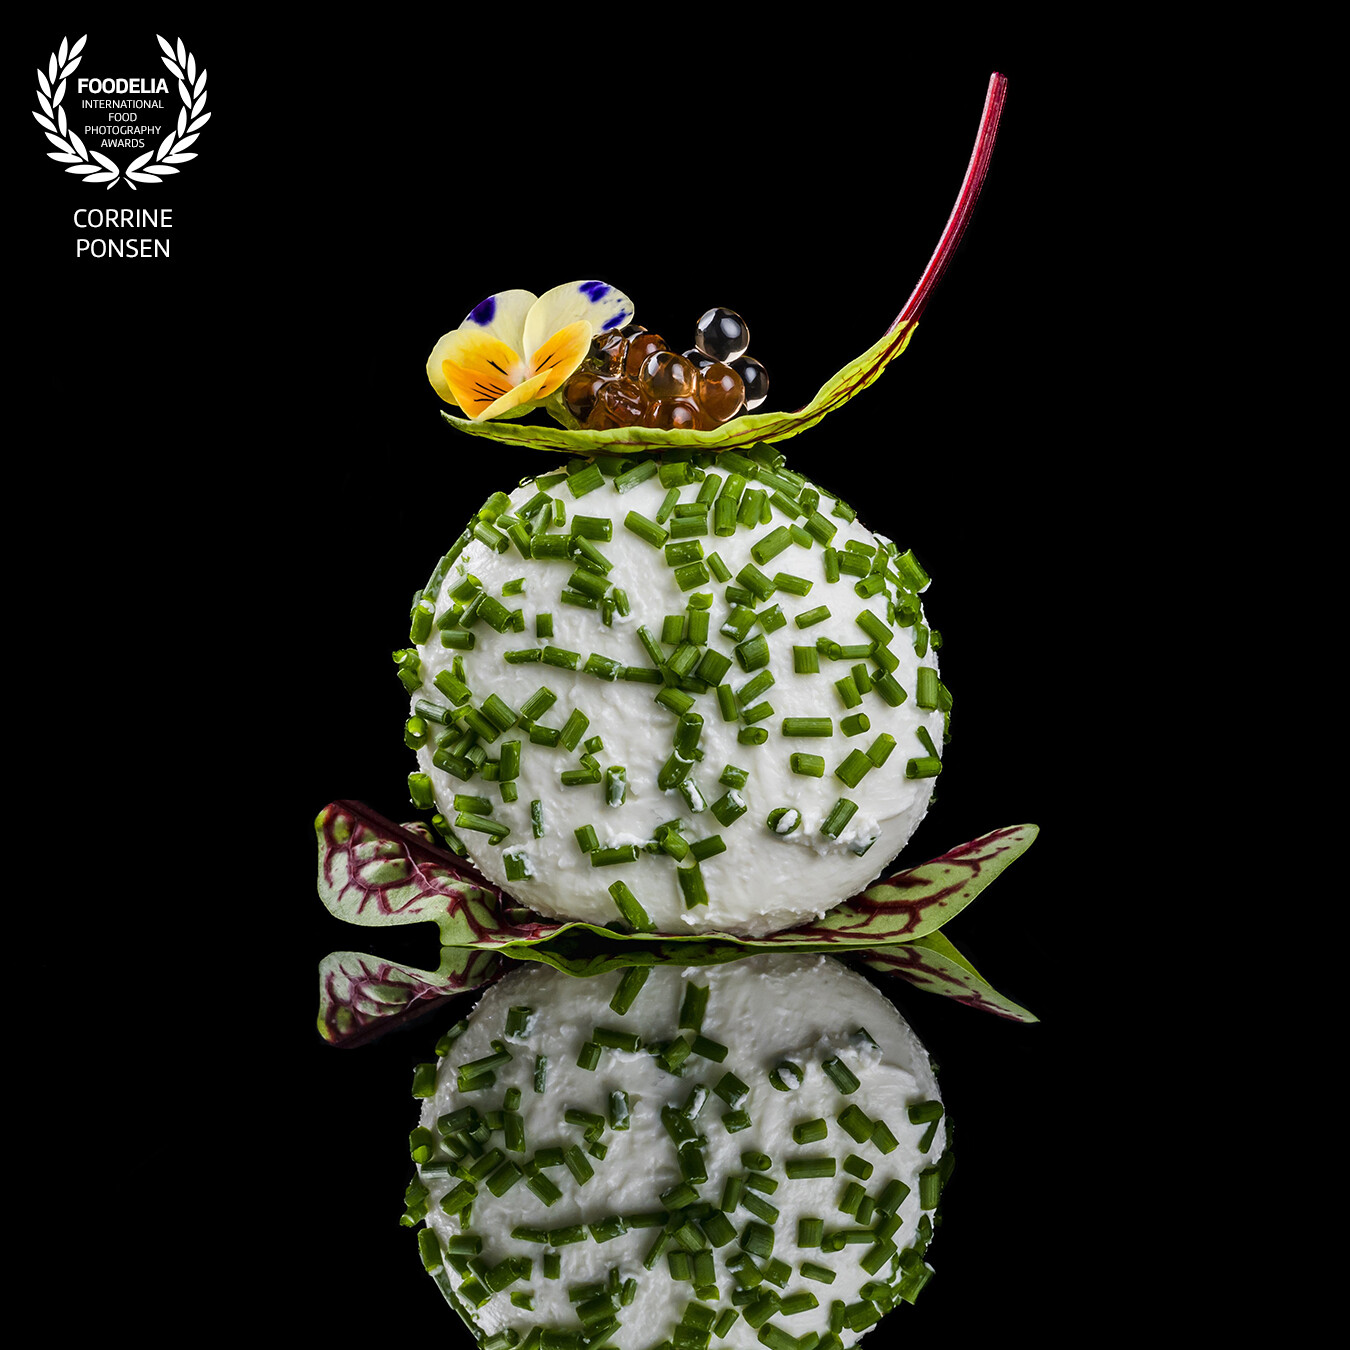 Creamy ball of goatcheese covered with chives and a eatable leaf and flower. On top some balsamico pearls.<br />
This is shot with a nikon Z8 and 105 mm with 2 flashes.